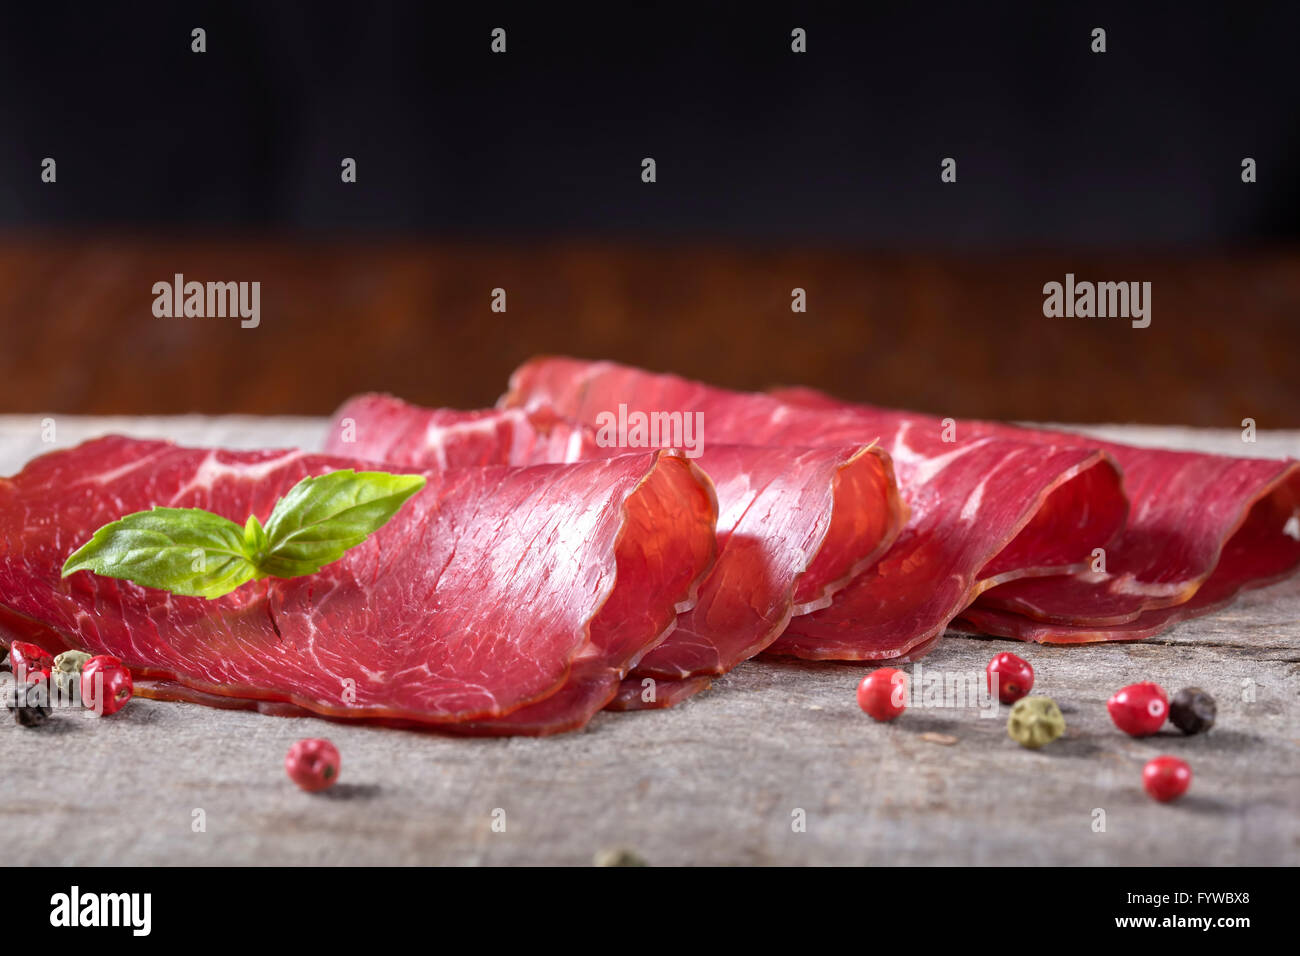 Smoked beef meat slices over rustic background Stock Photo